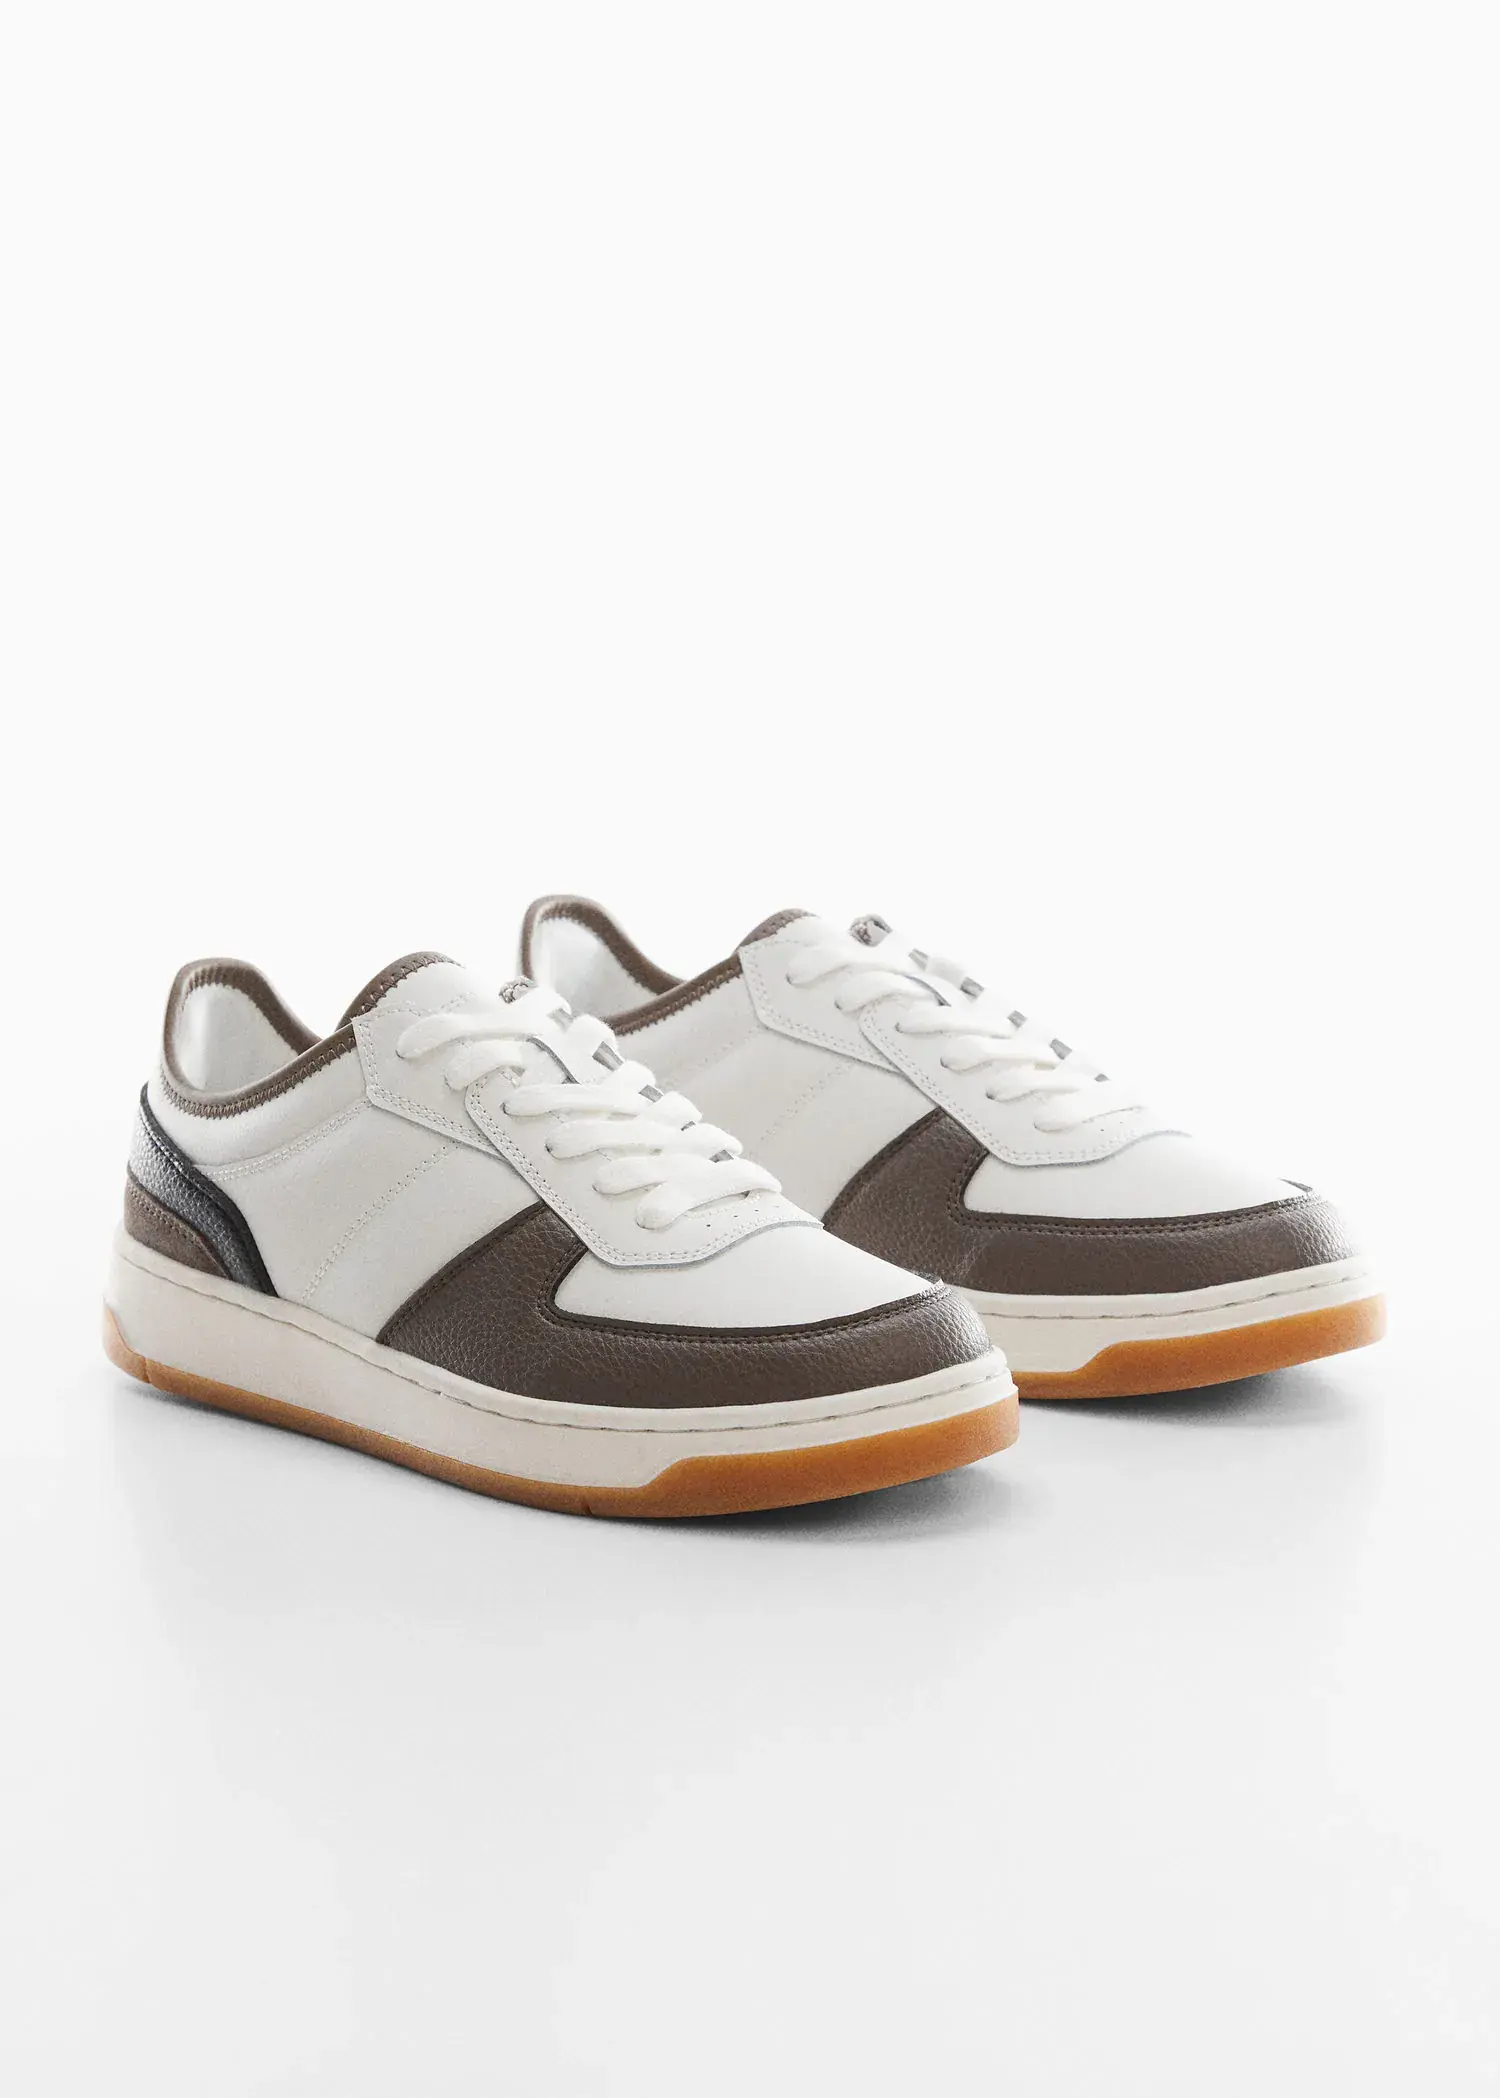 Mango Combined leather sneakers. 2